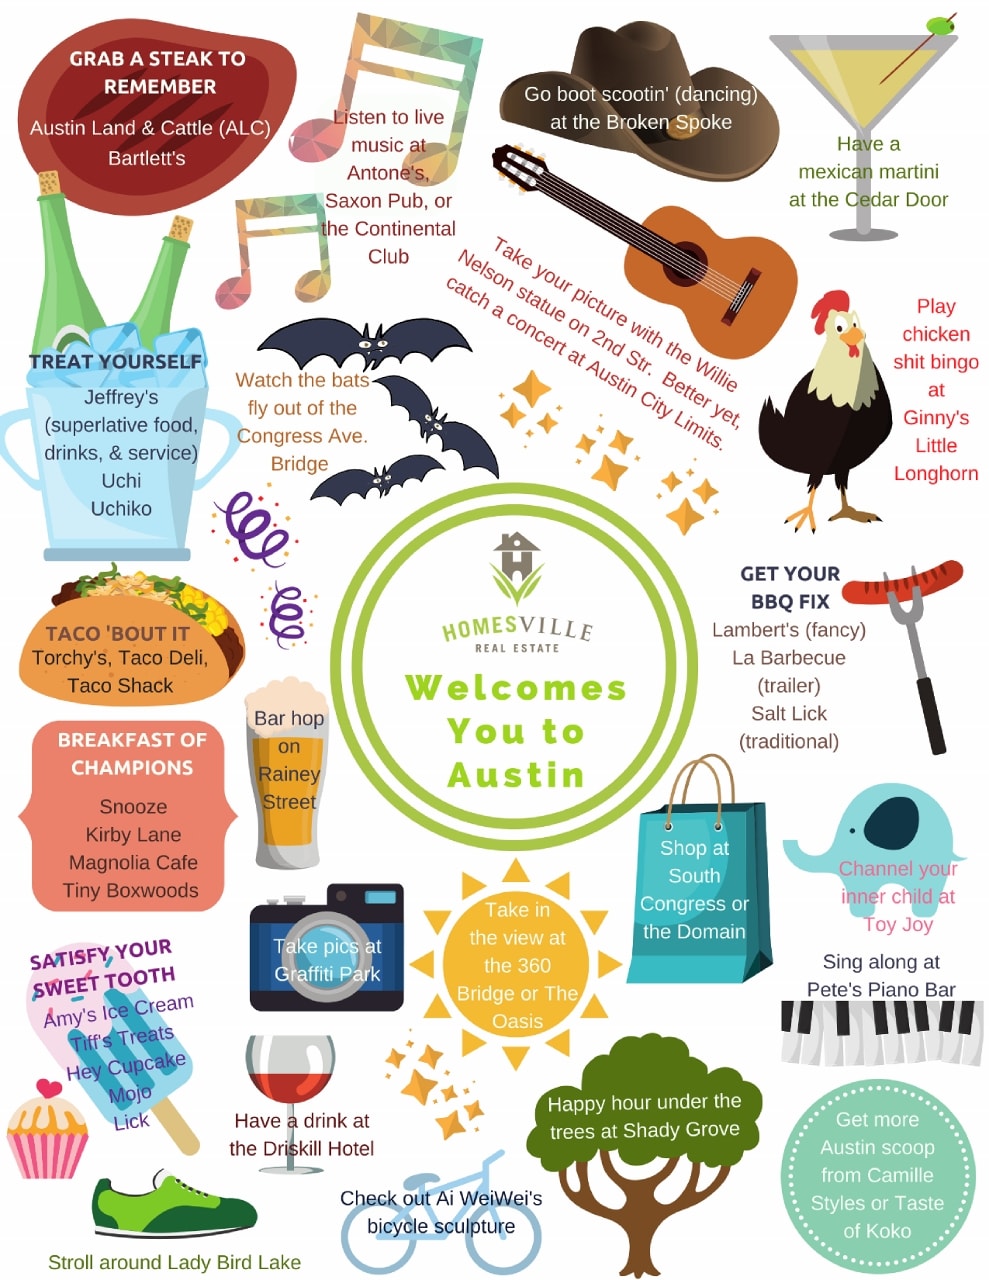 Moving to Austin? Here’s what you should know